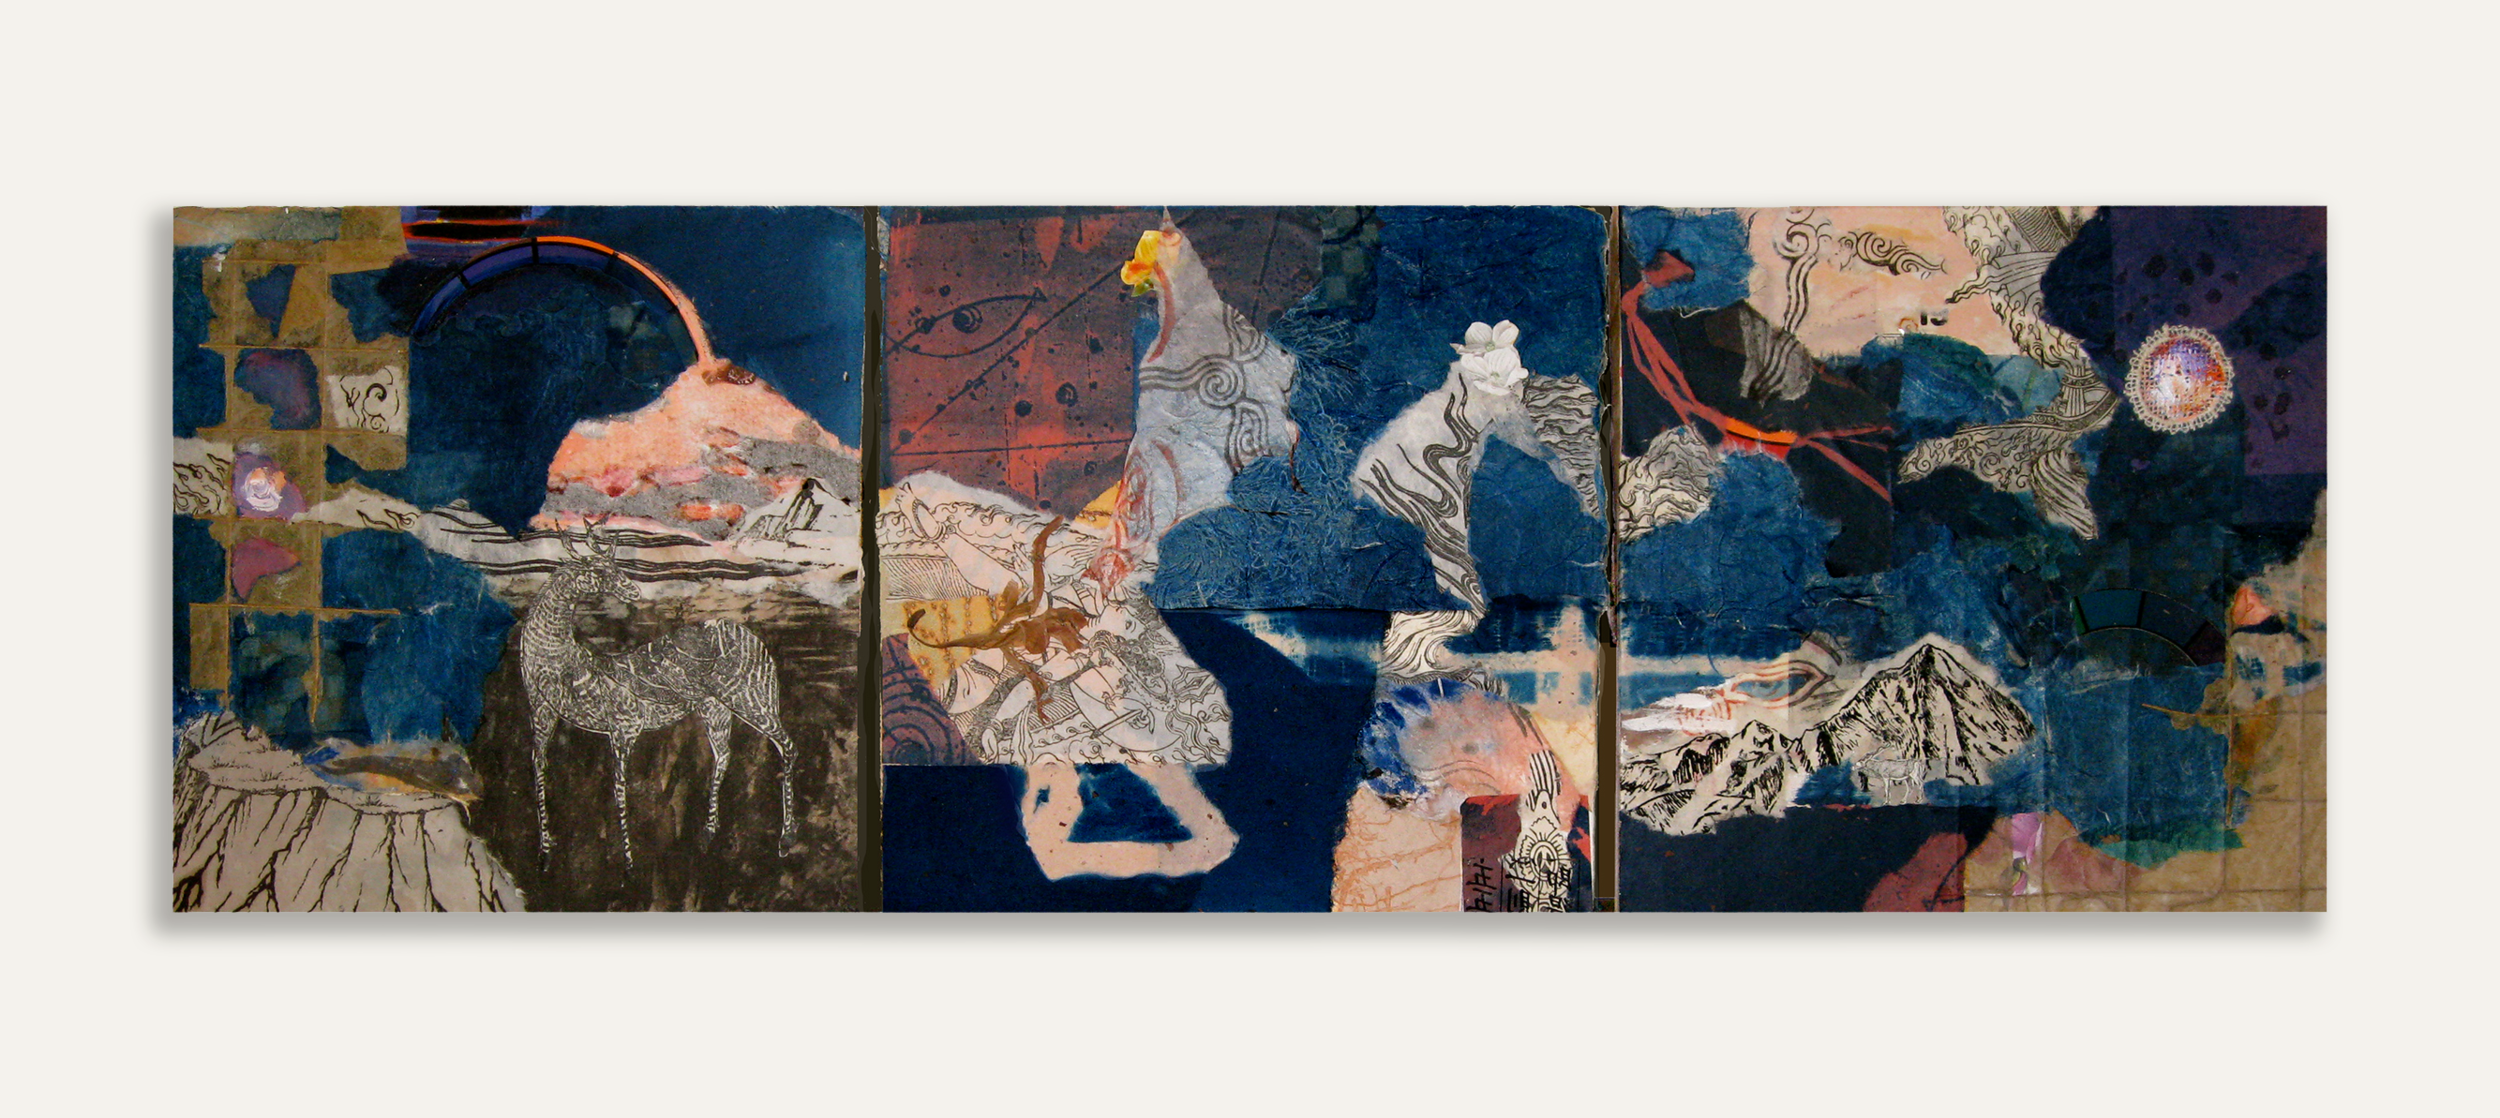  Space-Time Interval, 2016, Triptych on Board with Cyanotype, Found Paper, Paint, 12 x 36 